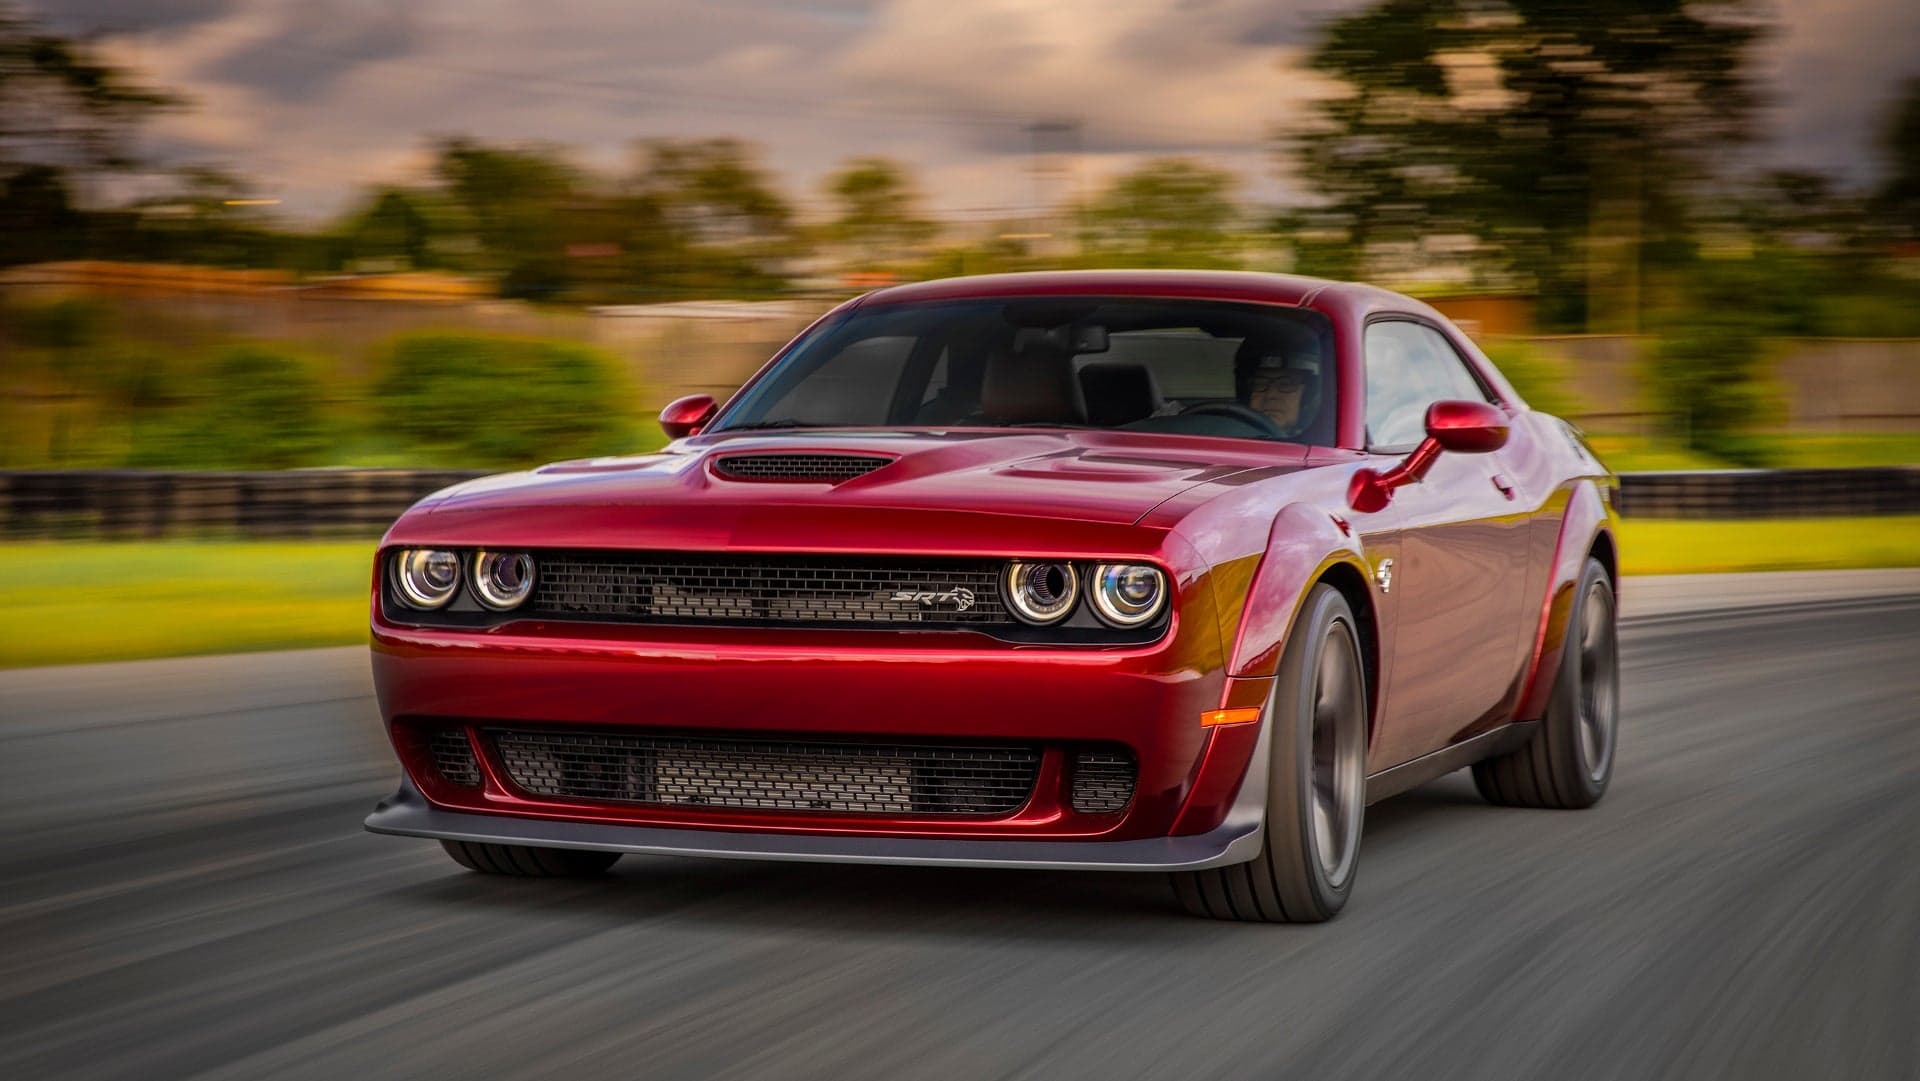 Dodge Challenger Hellcat, Pickup Trucks Top America’s List of Vehicles Most Likely to Be Stolen